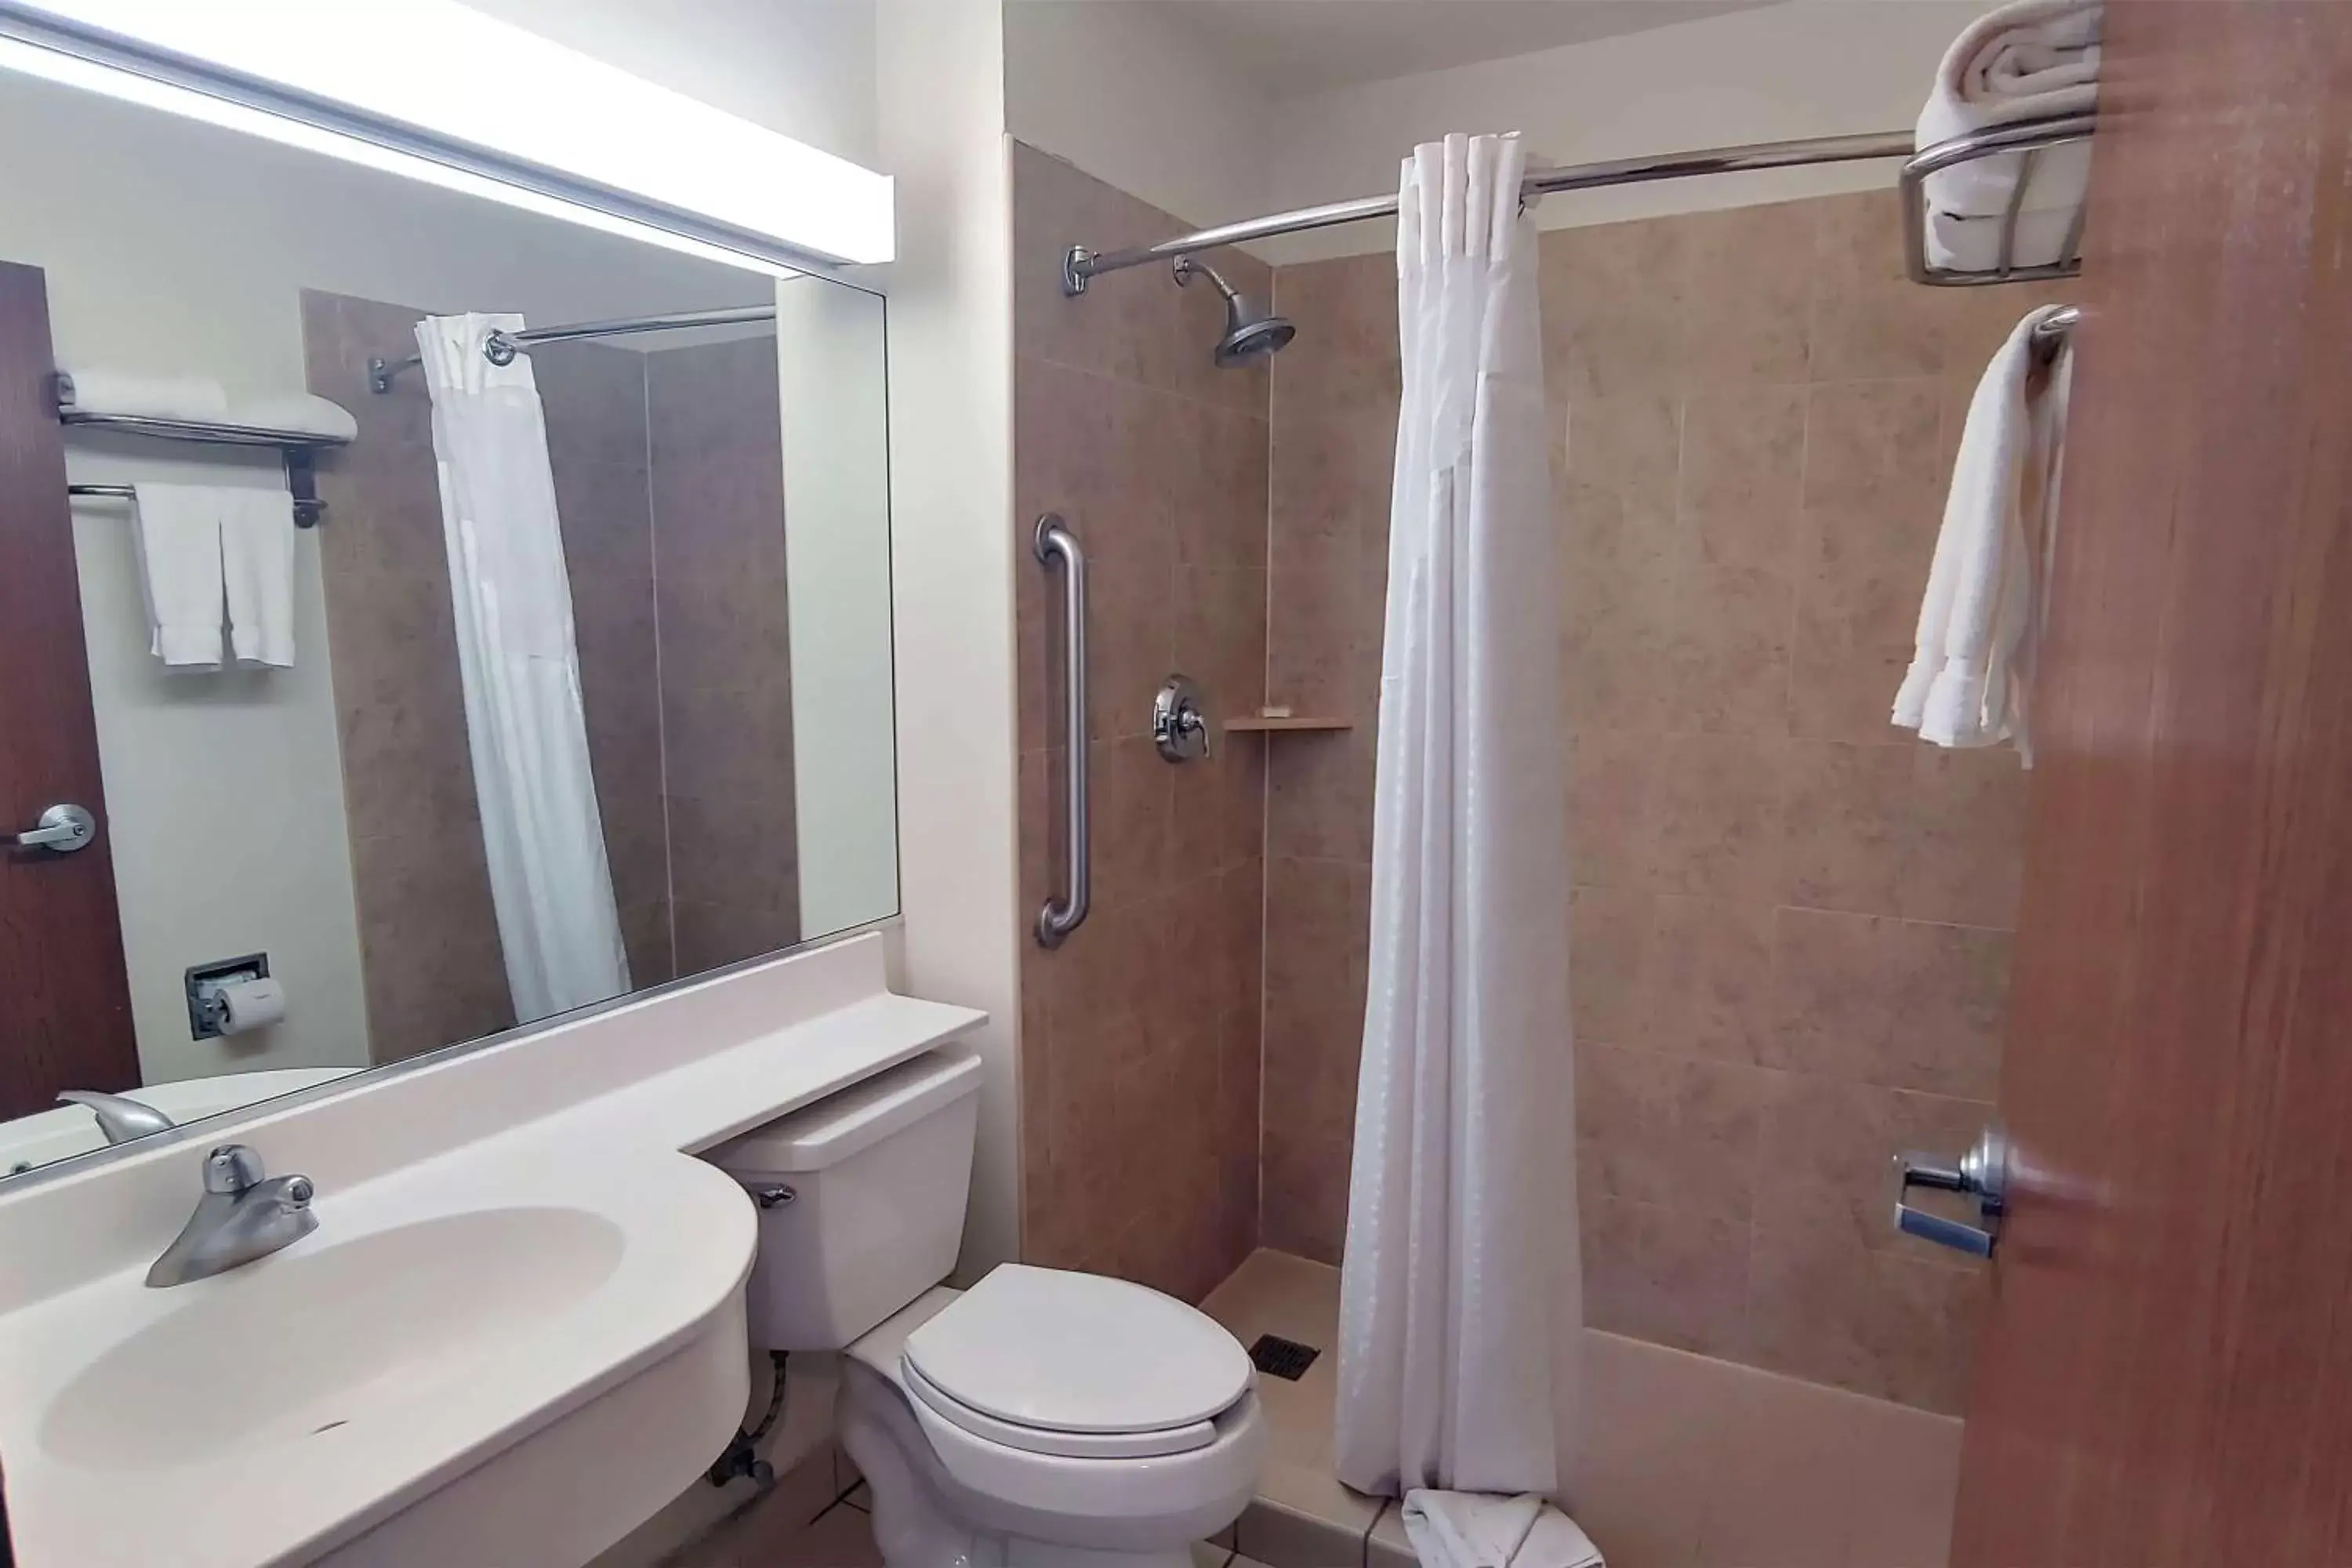 Bathroom in Microtel Inn and Suites by Wyndham Ciudad Juarez, US Consulate